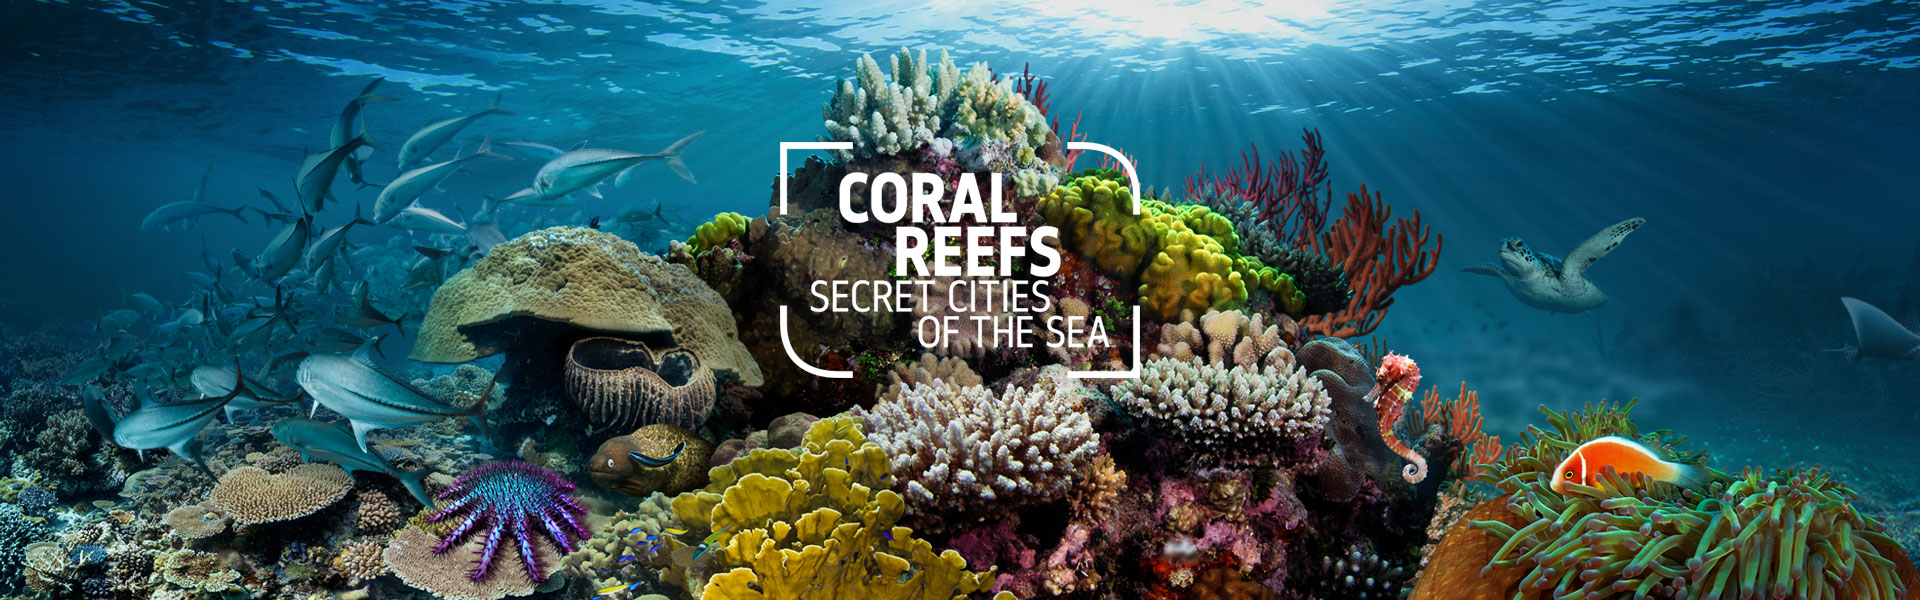 Coral Reefs: Secret Cities of the Sea logo